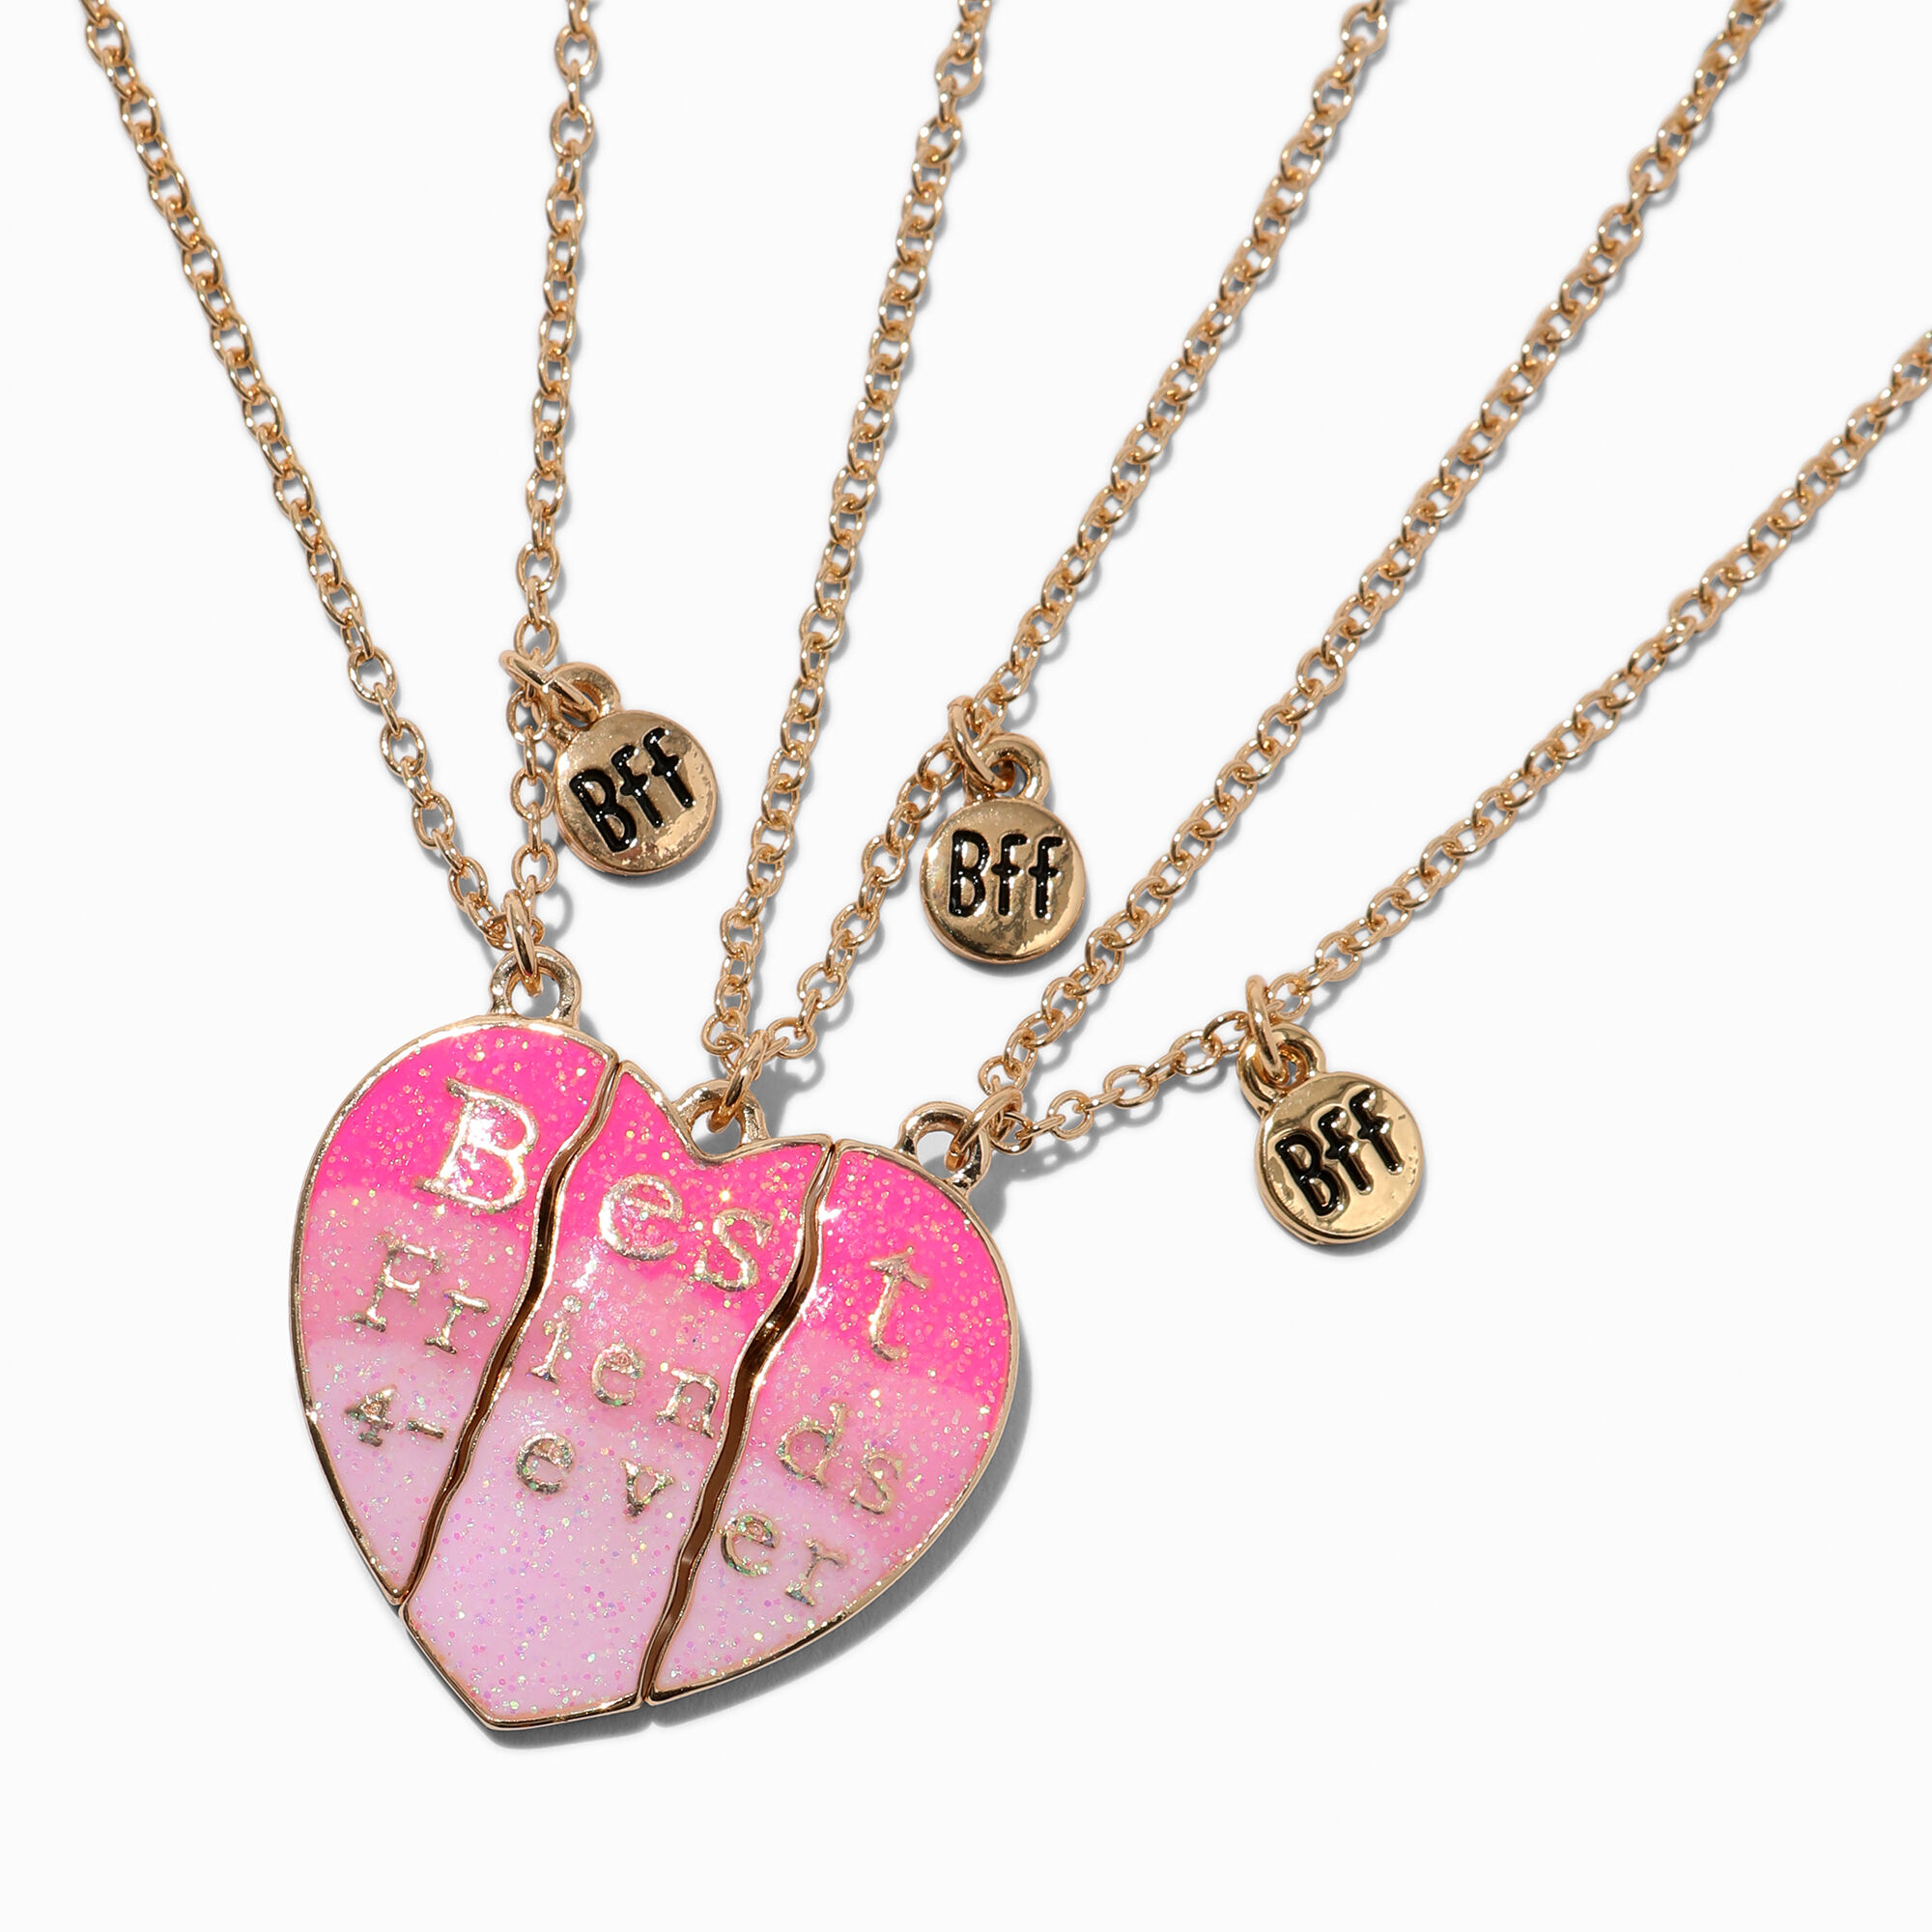 View Claires Best Friends Ombre Heart Pendant Necklaces 3 Pack Pink information